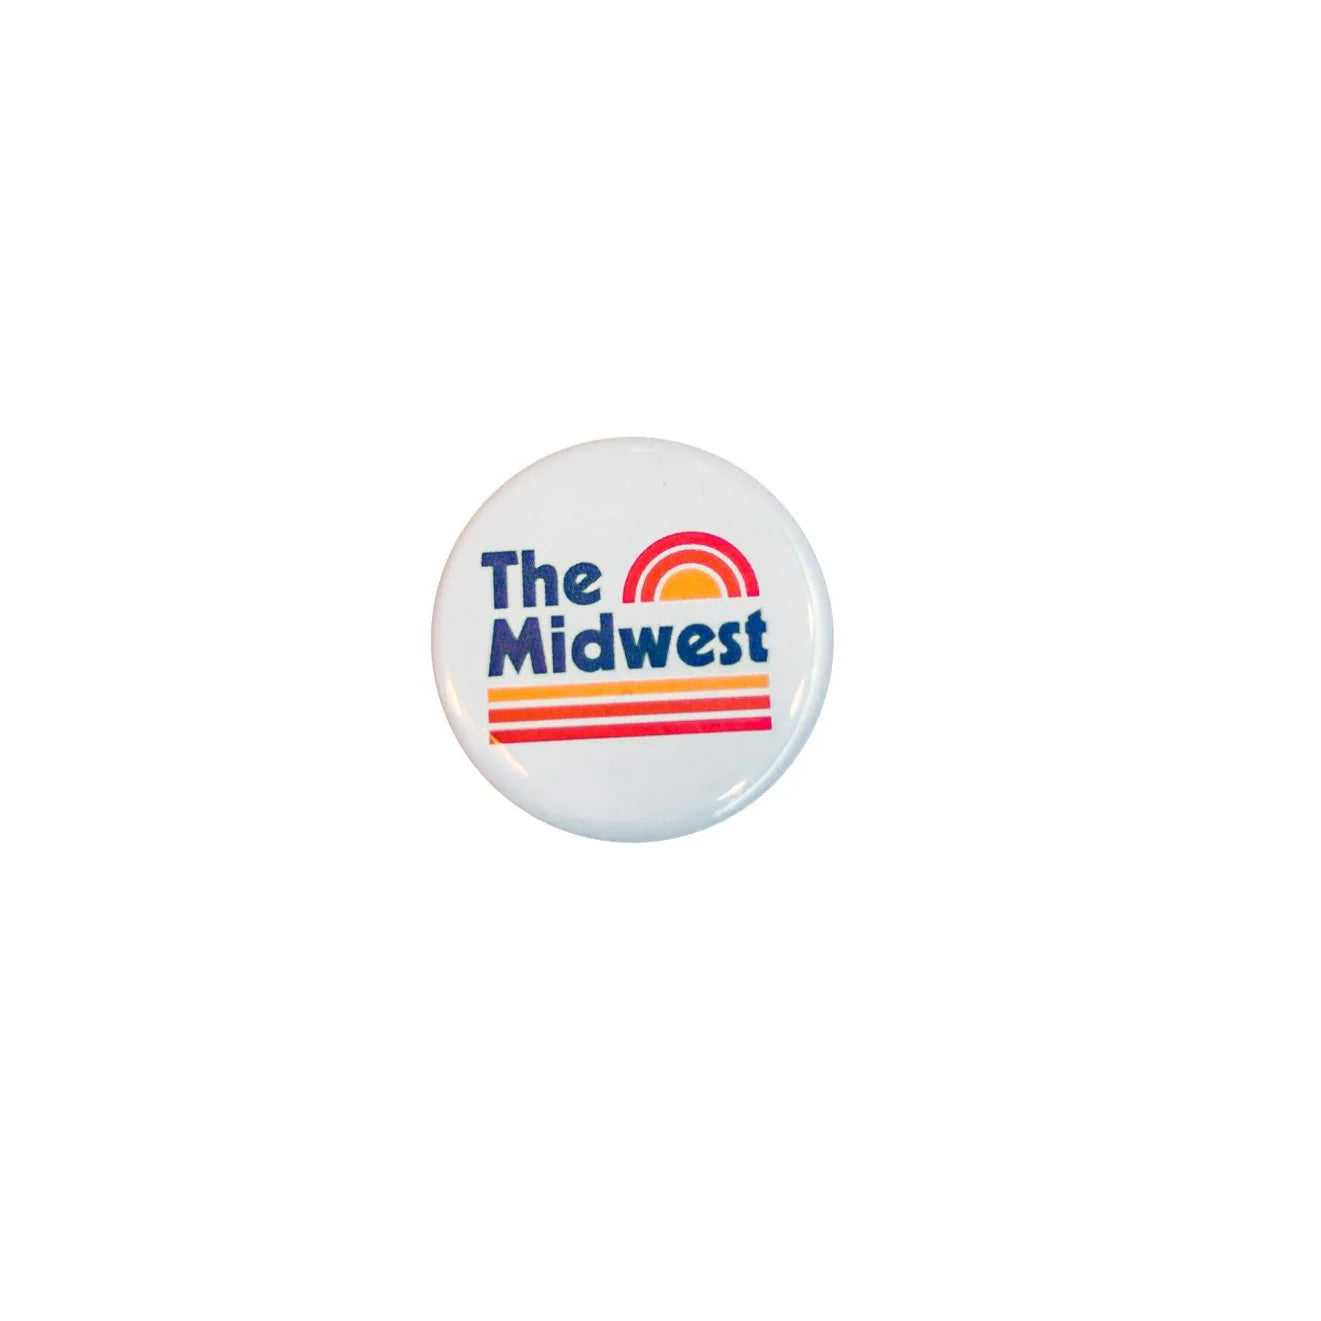 The Midwest Vintage Pin